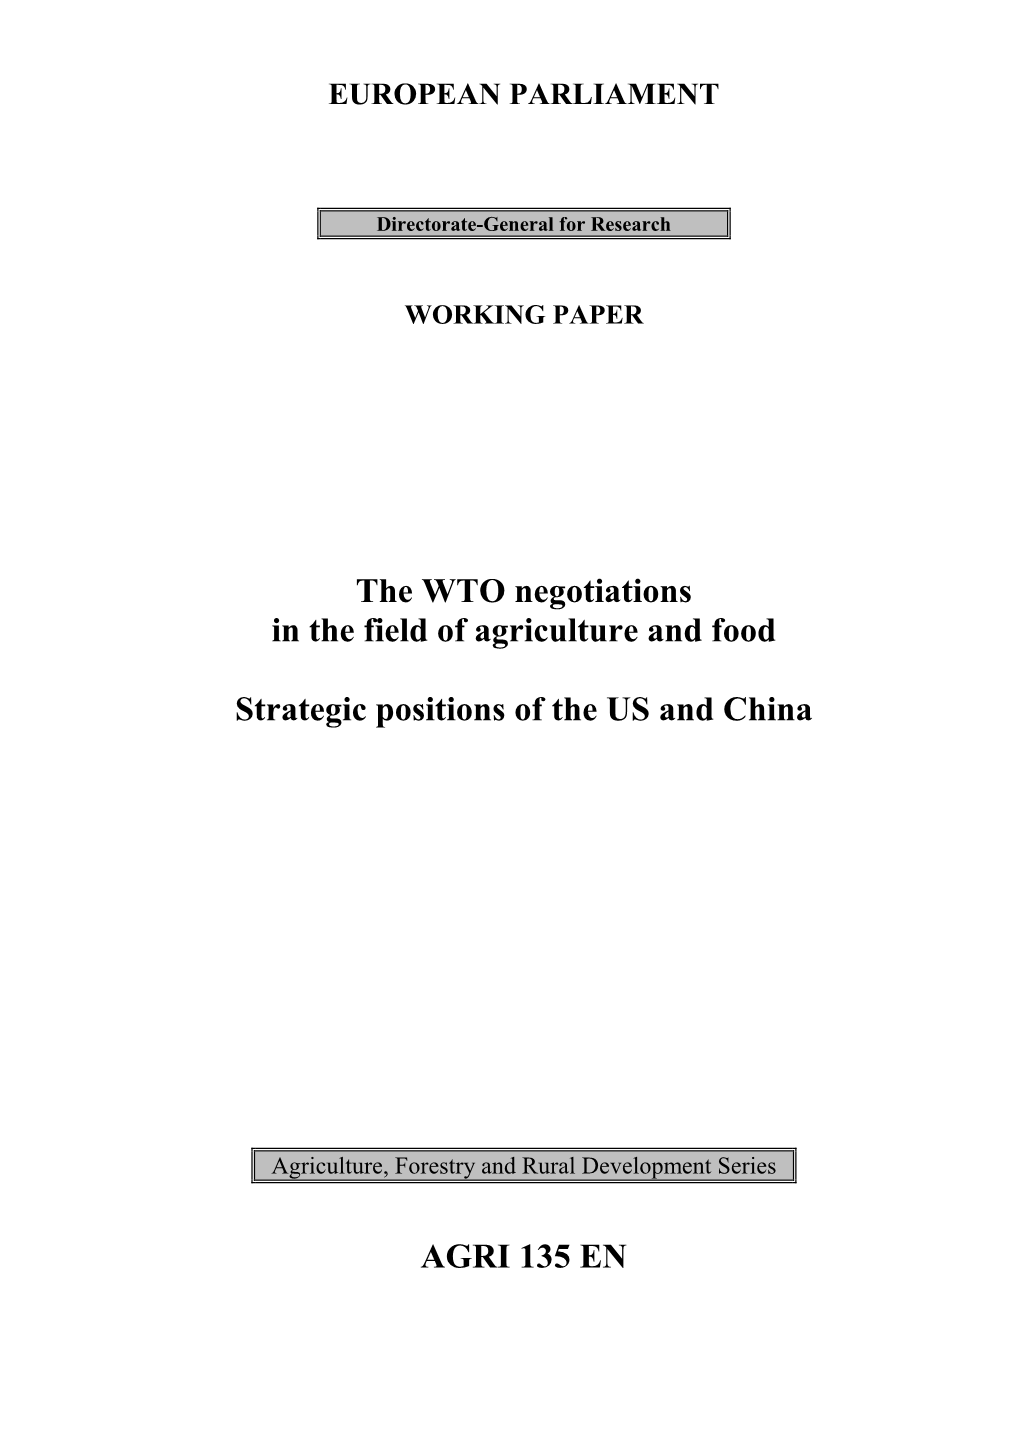 The WTO Negotiations in the Field of Agriculture and Food Strategic